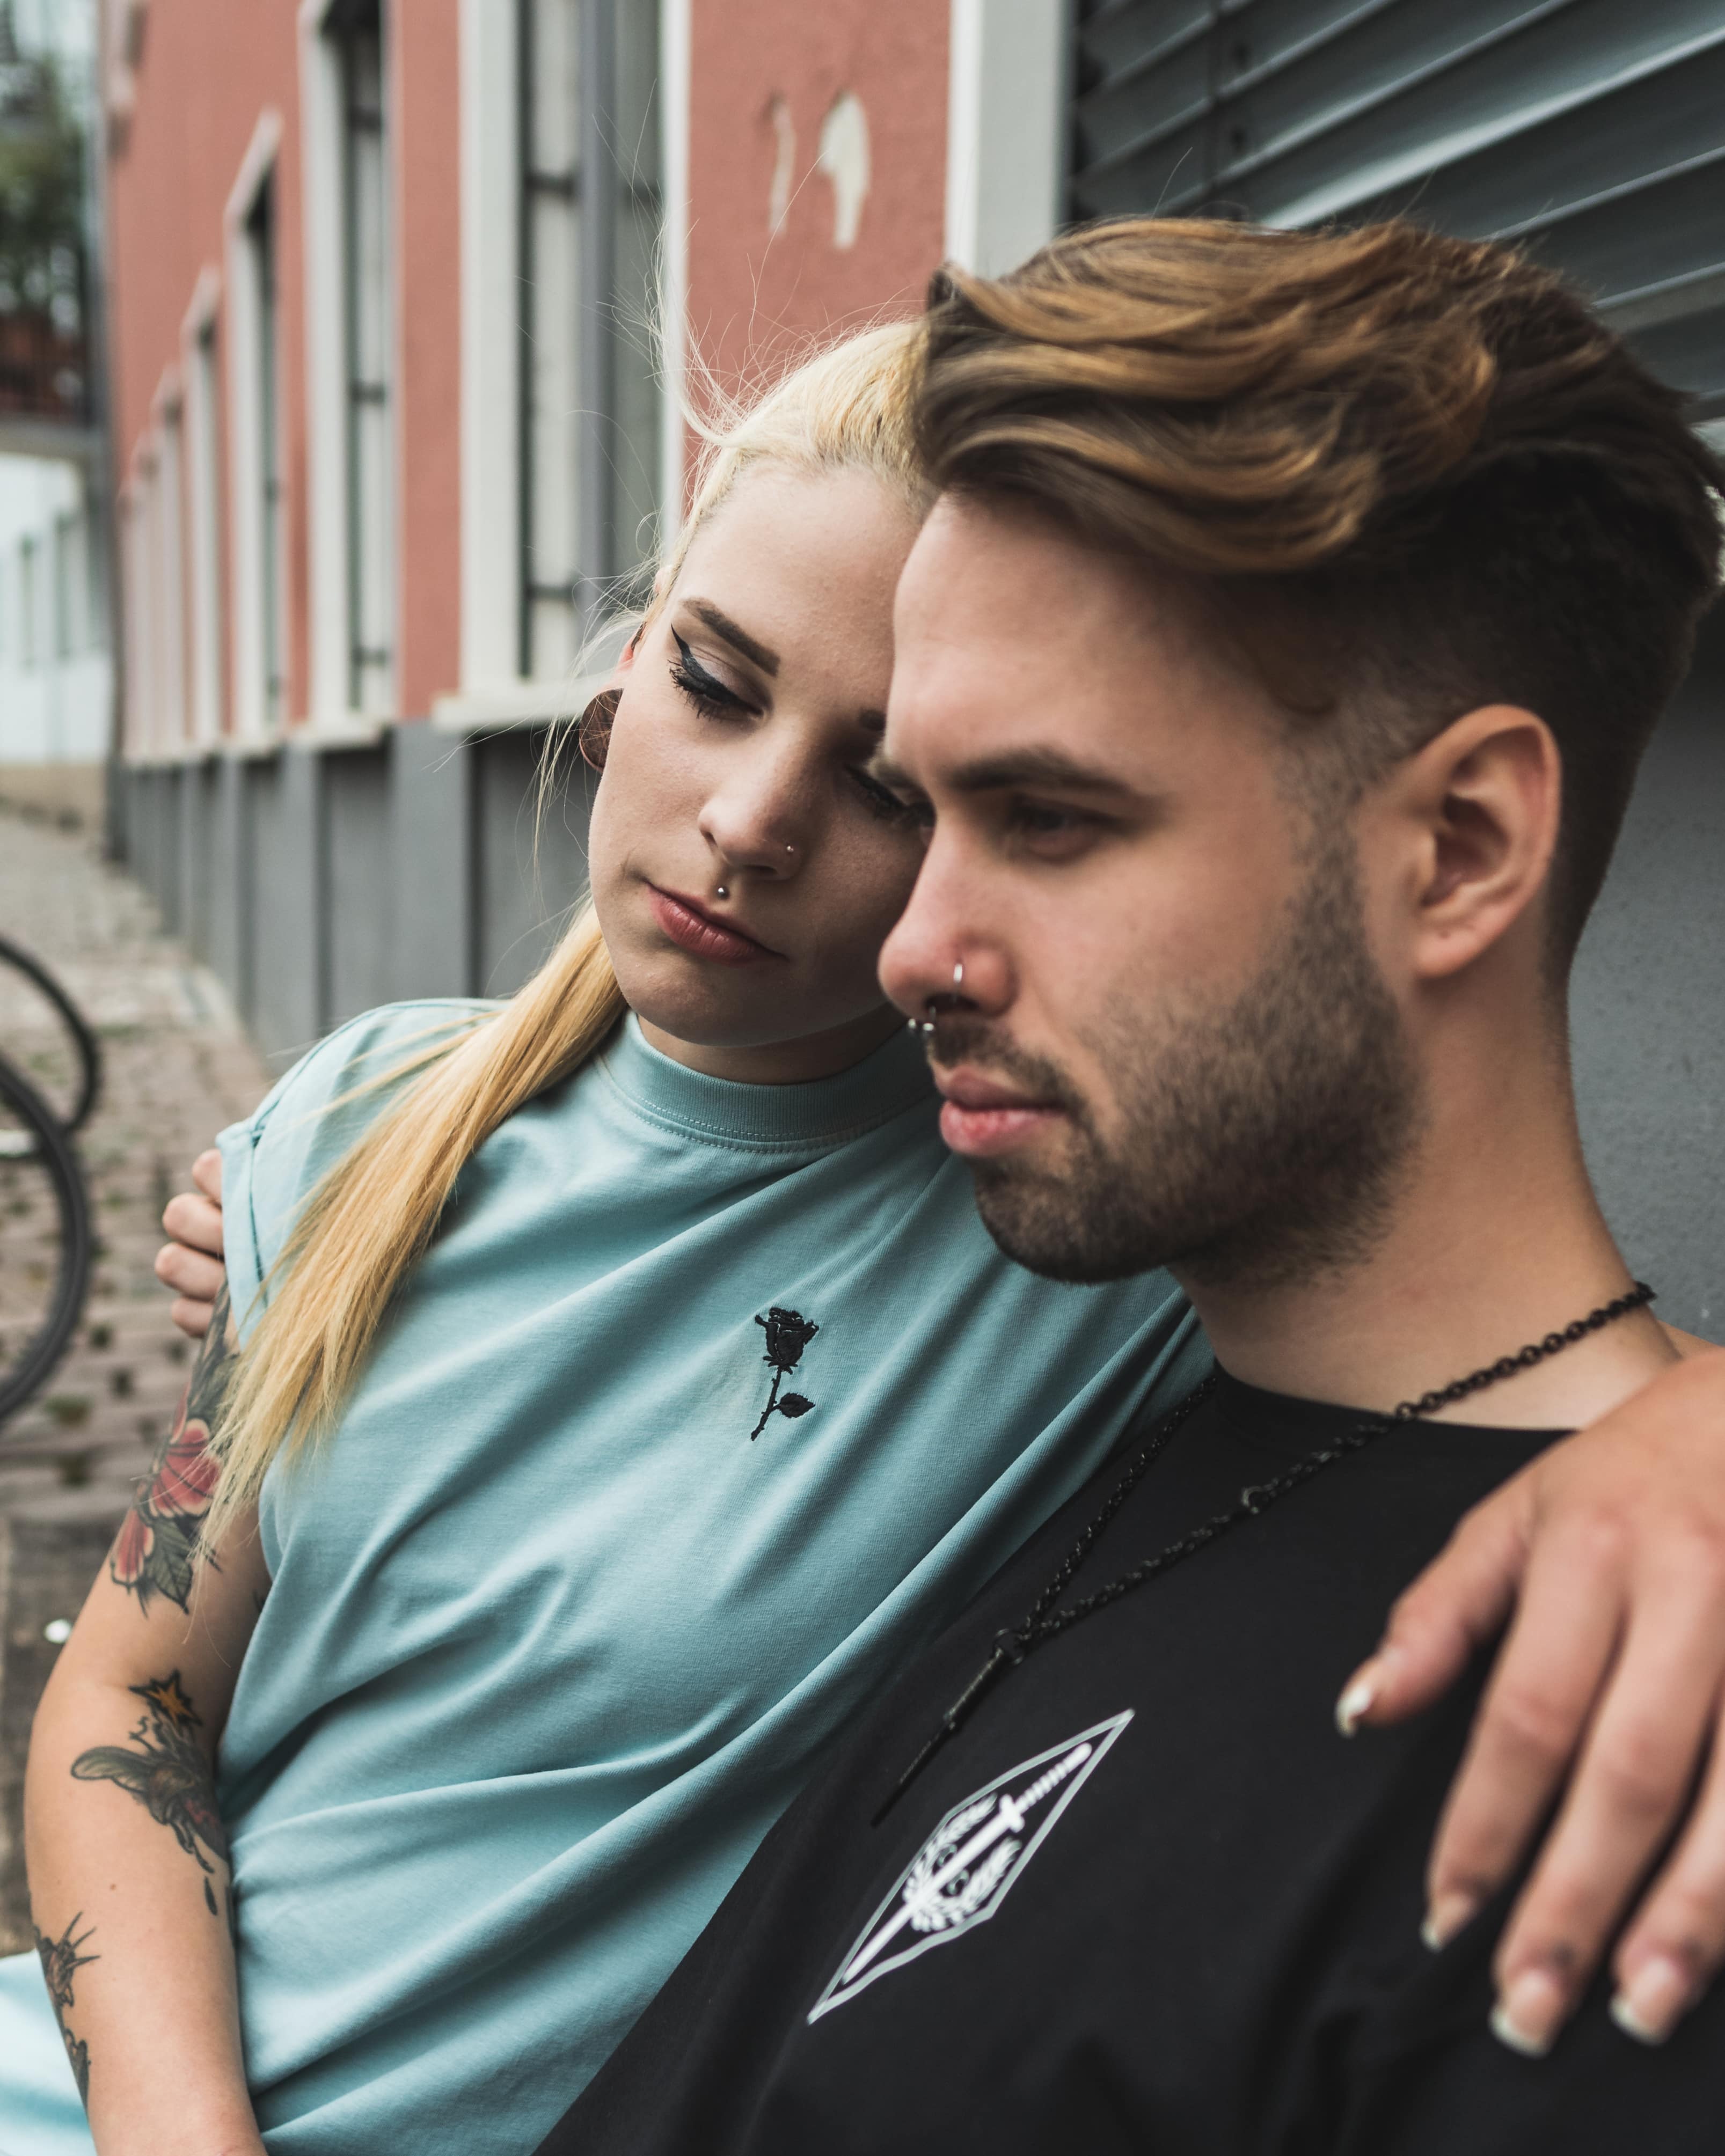 https://toh.photography/media/pages/portfolio/shooting-bei-careless-clothing-streetfashion-in-frankfurt/de17adfccd-1585504328/p7140251.jpg